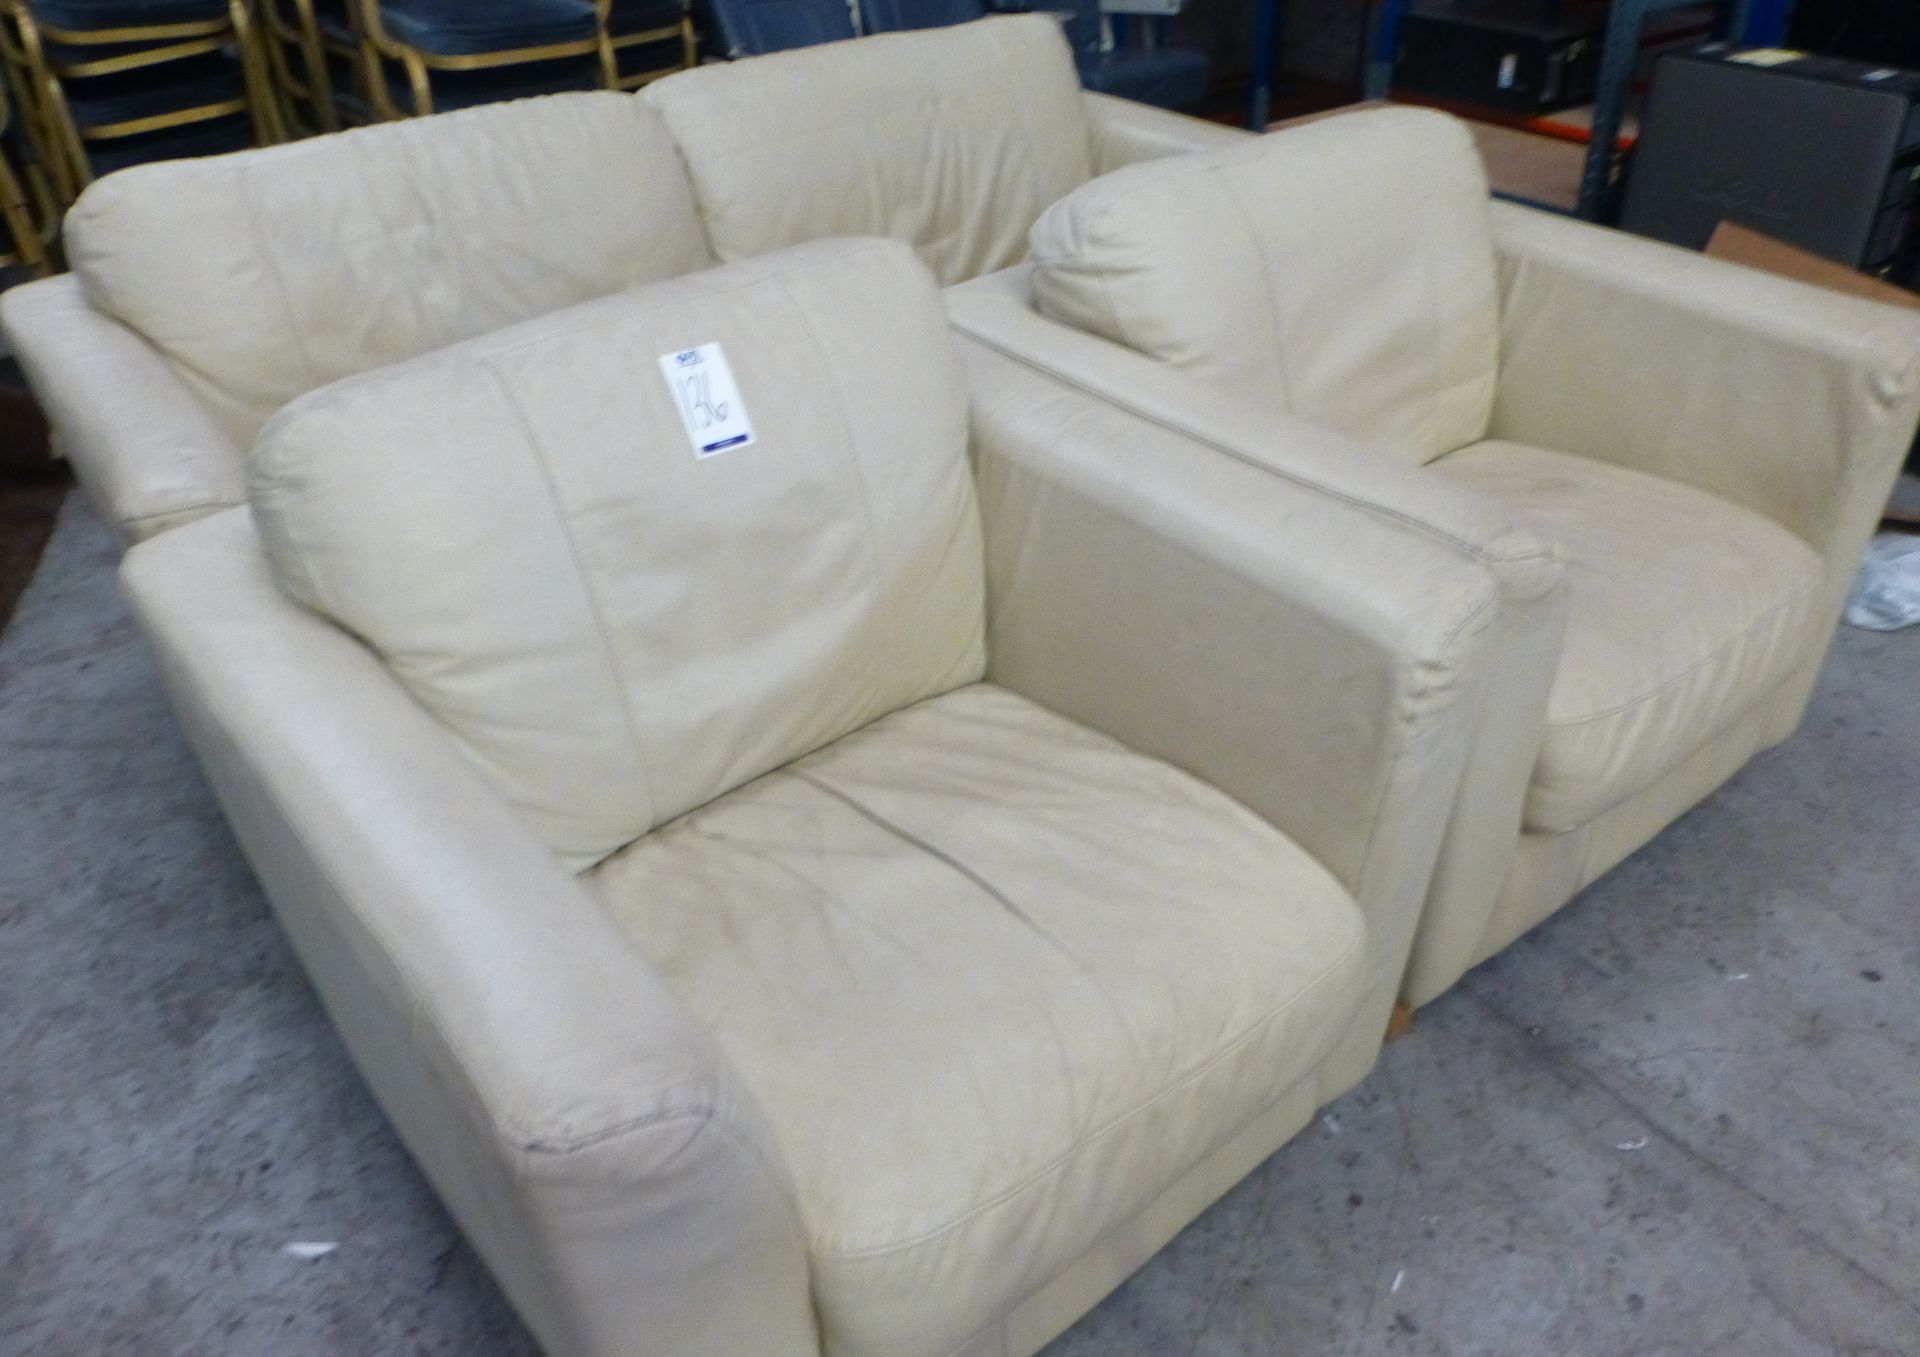 Cream Leatherette 2 Seat Sofa & 2 Matching Armchairs (Located 82 Rolfe Street, Smethwick, B66 2AX) - Image 2 of 2